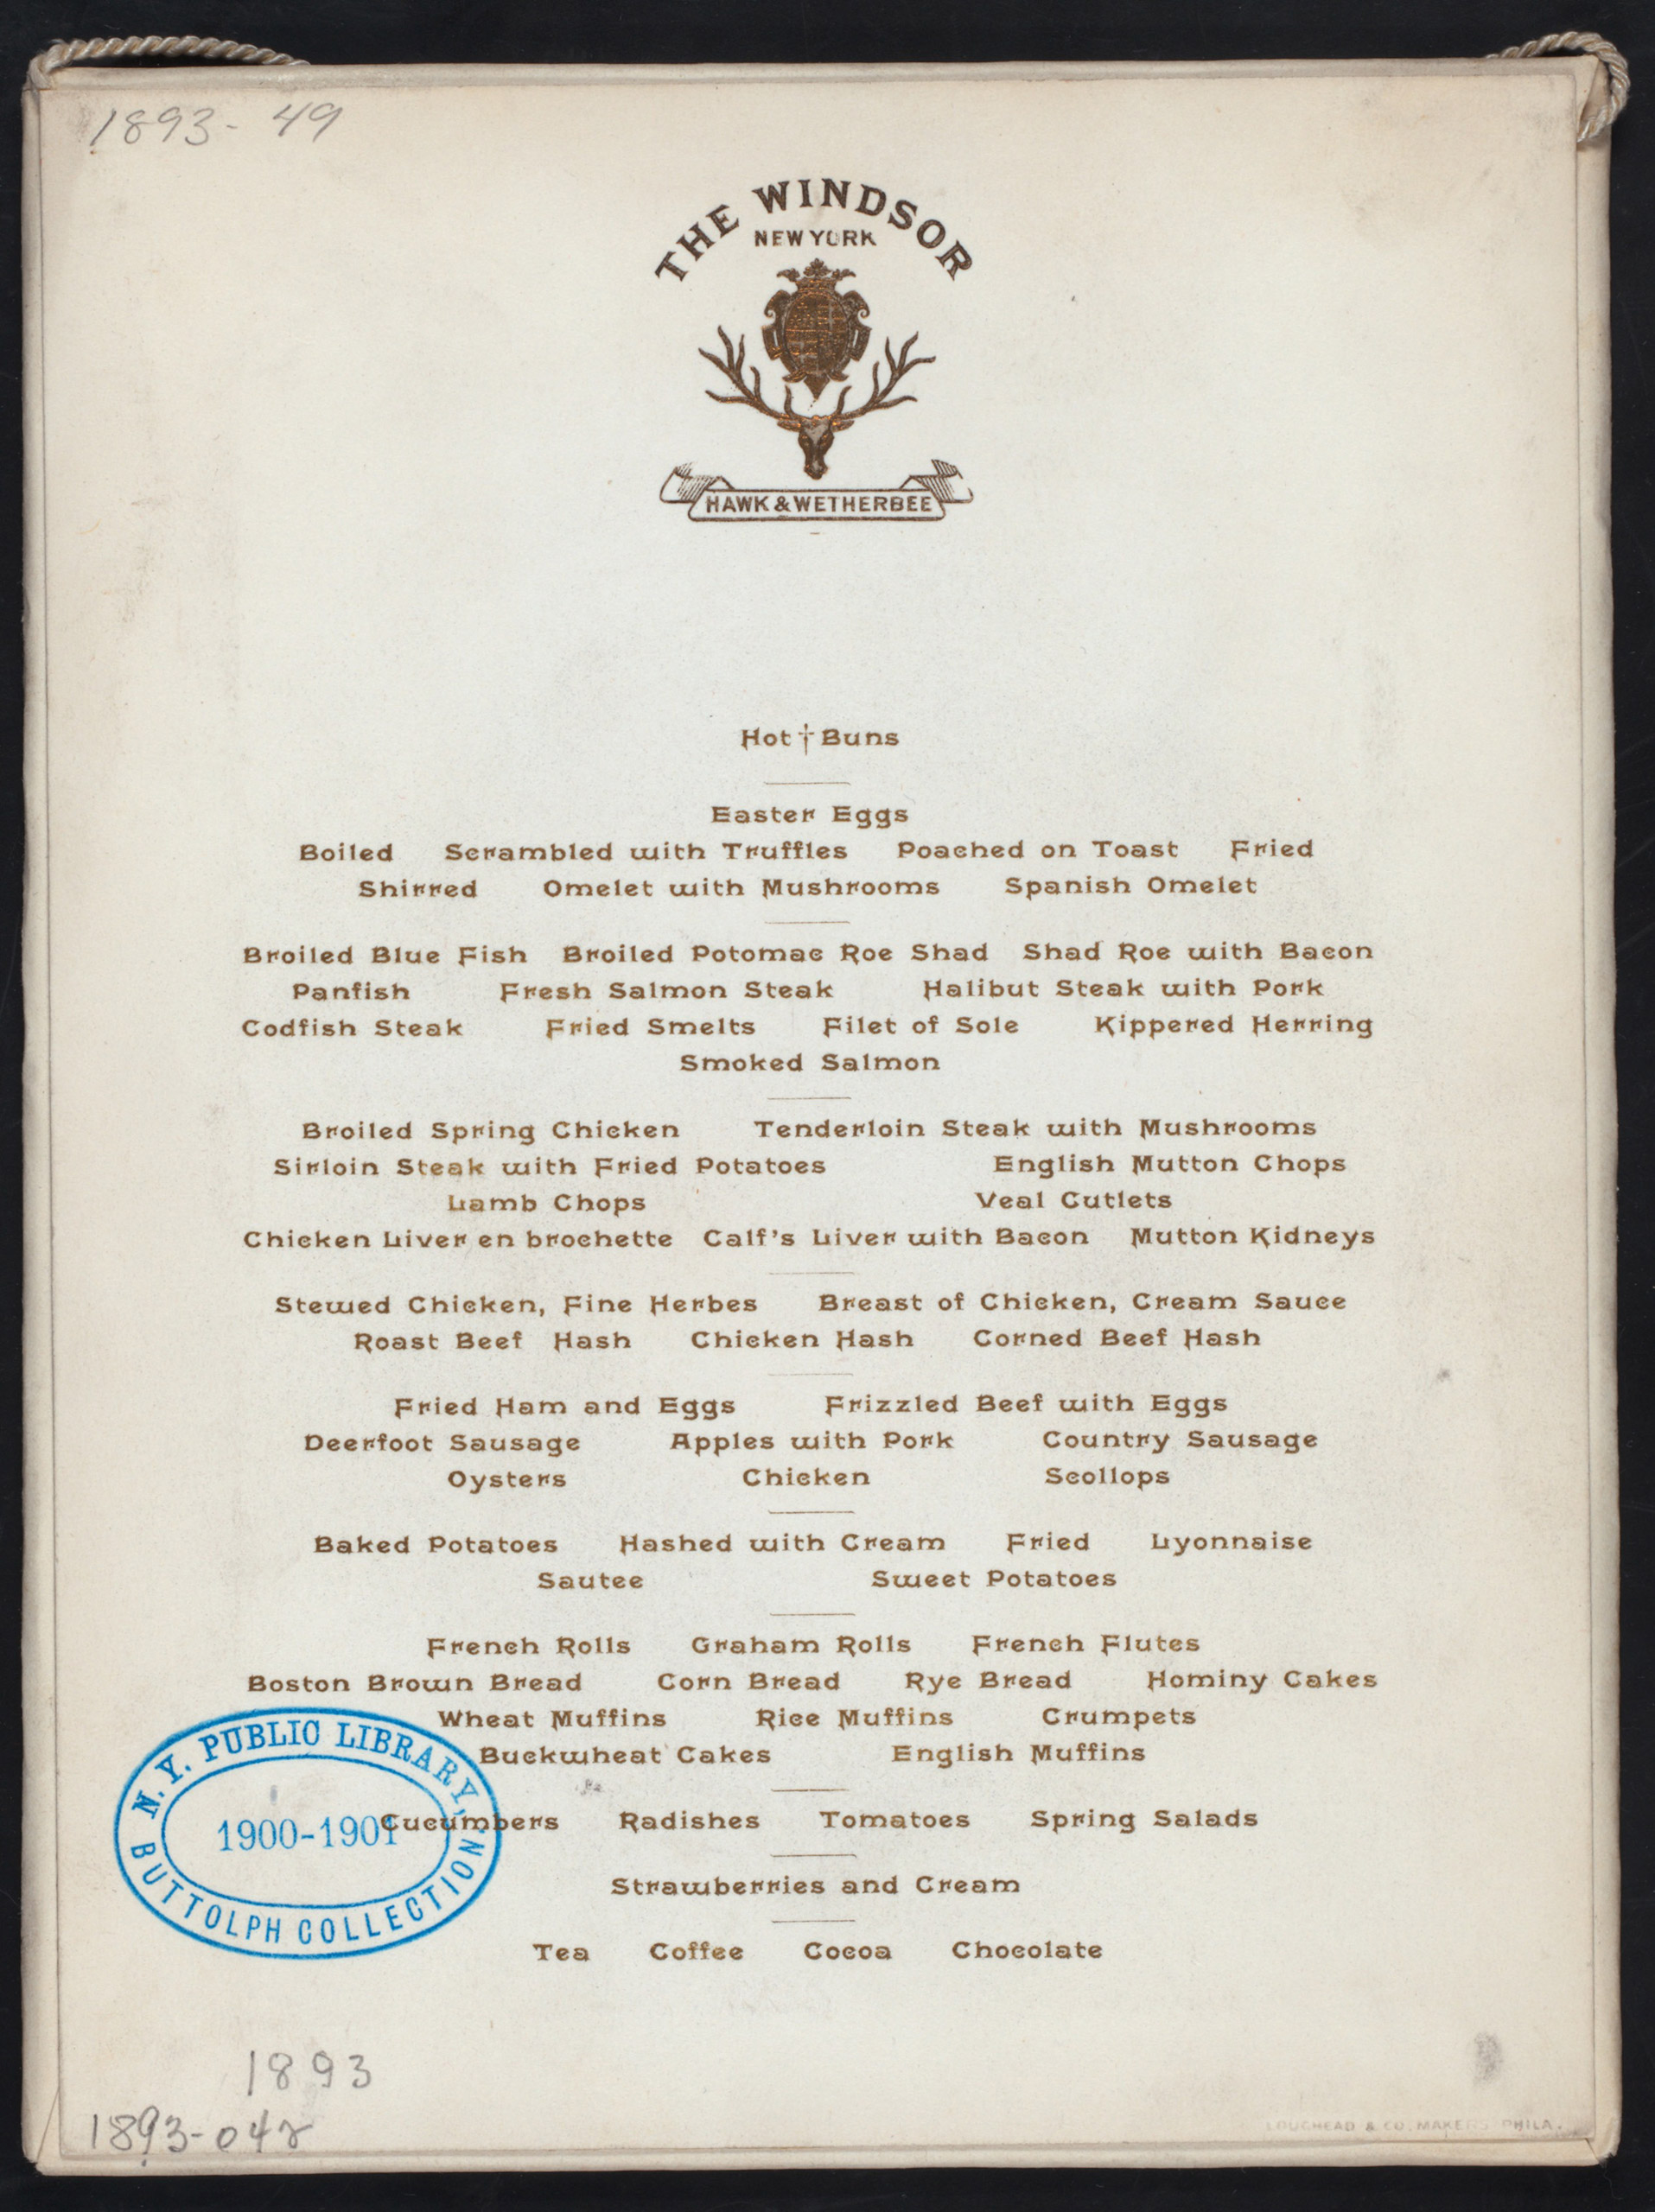 Easter dinner menu held at the Hawk & Wetherbee at The Windsor in New York, NY. 1893. From the Buttolph collection of menus.